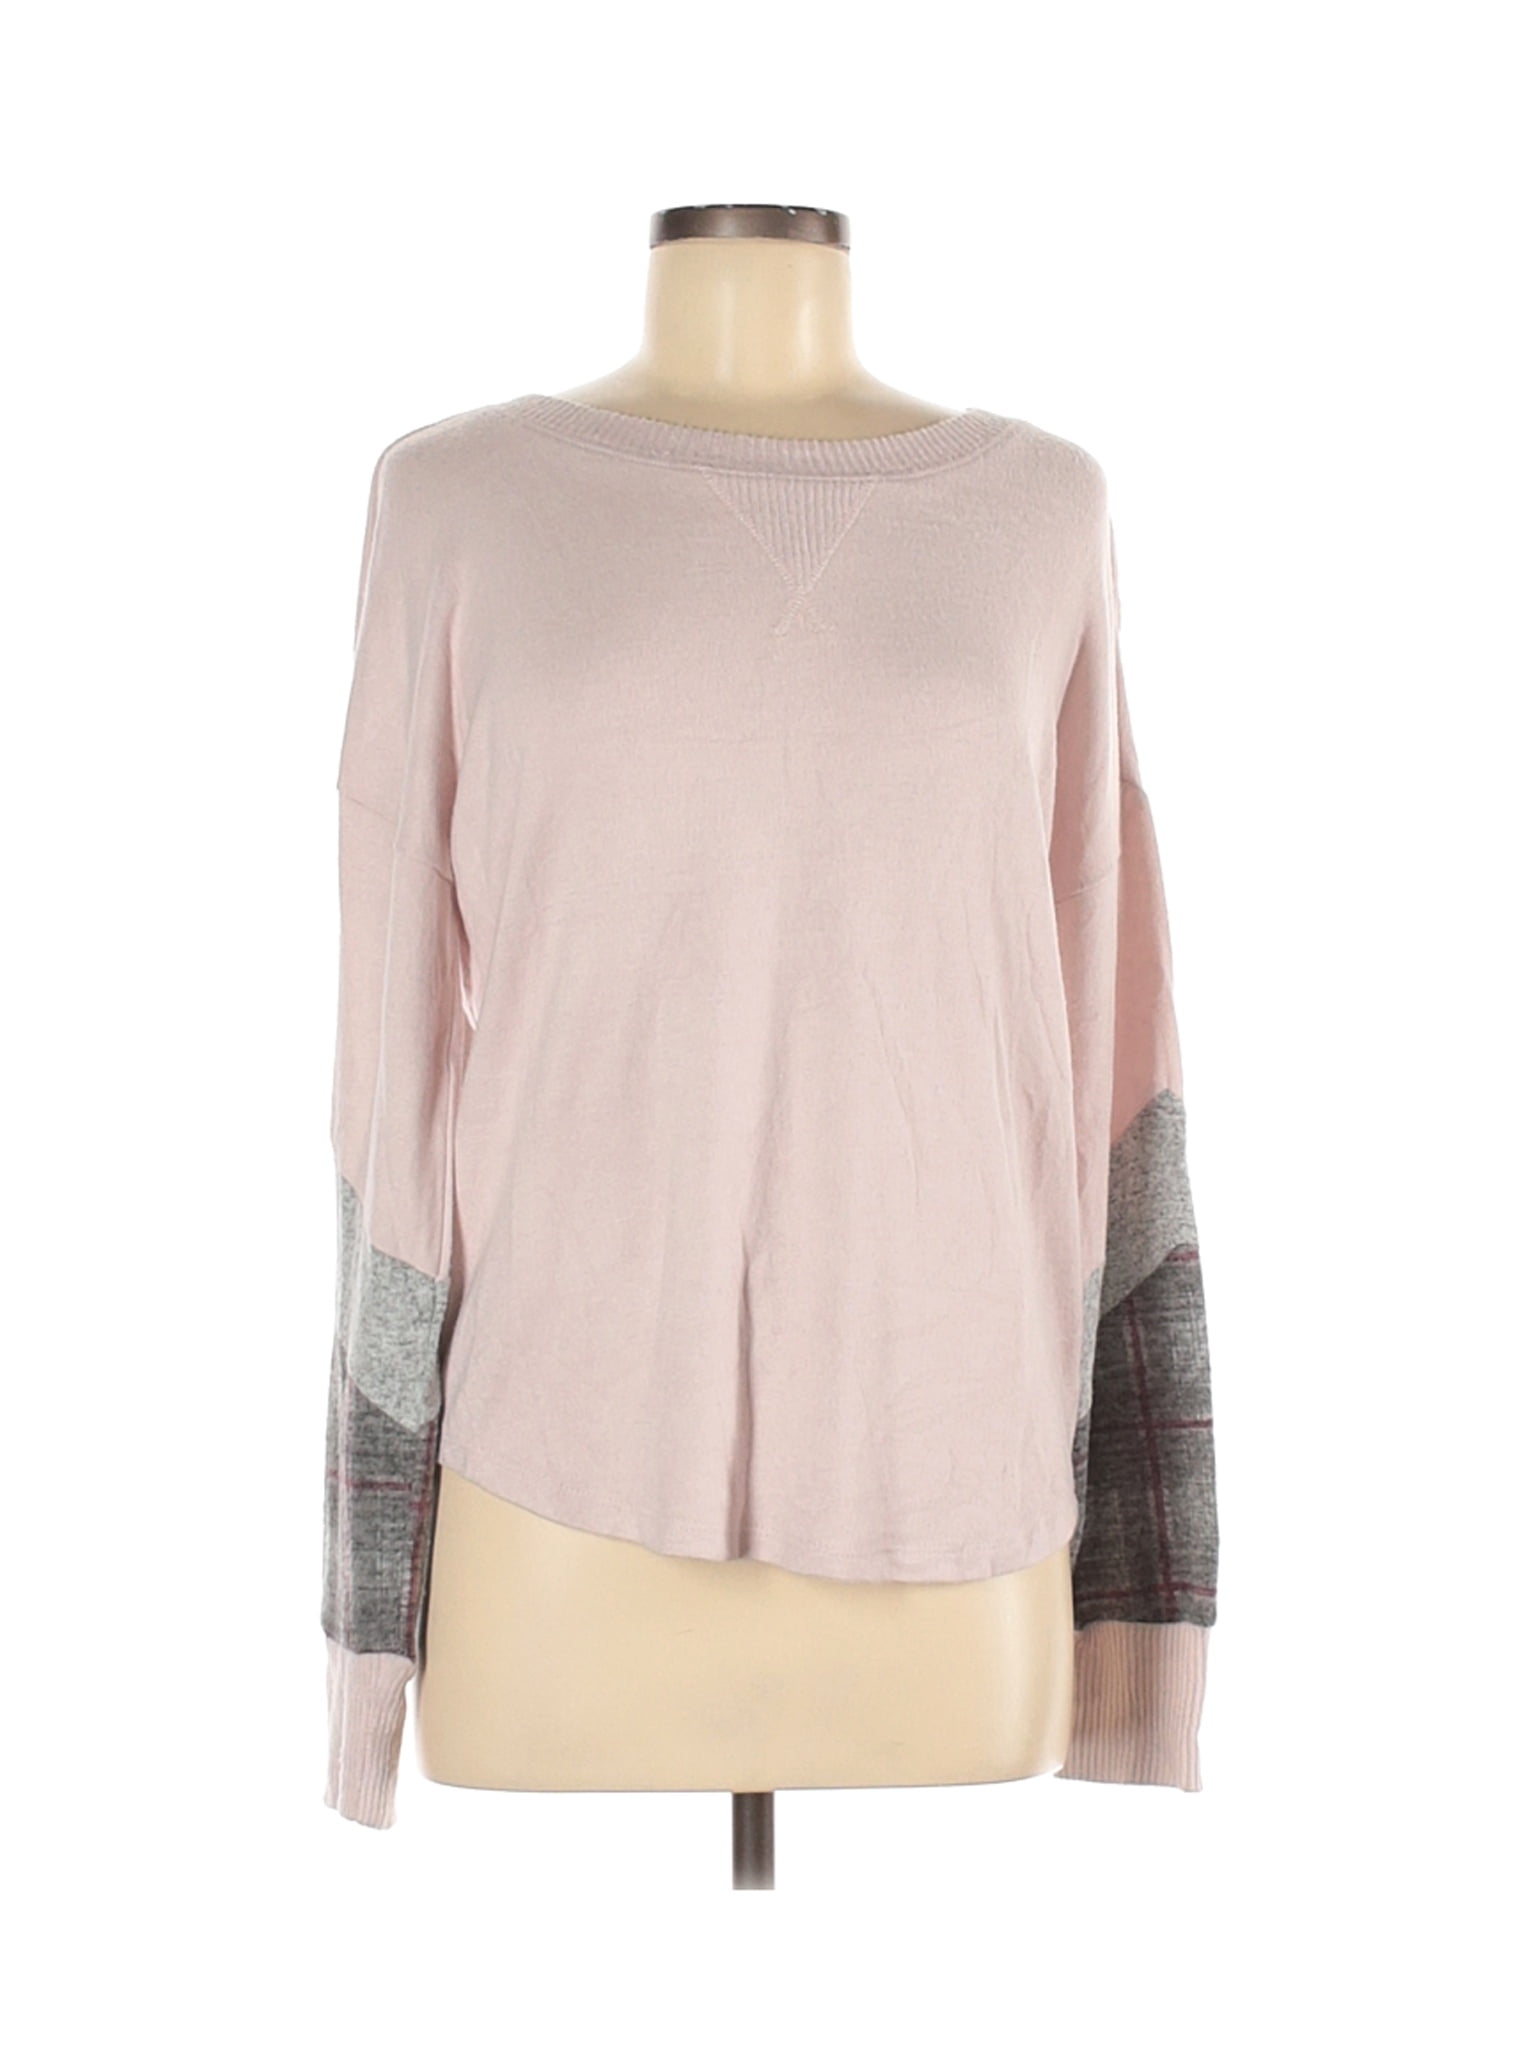 Hippie Rose - Pre-Owned Hippie Rose Women's Size M Pullover Sweater ...